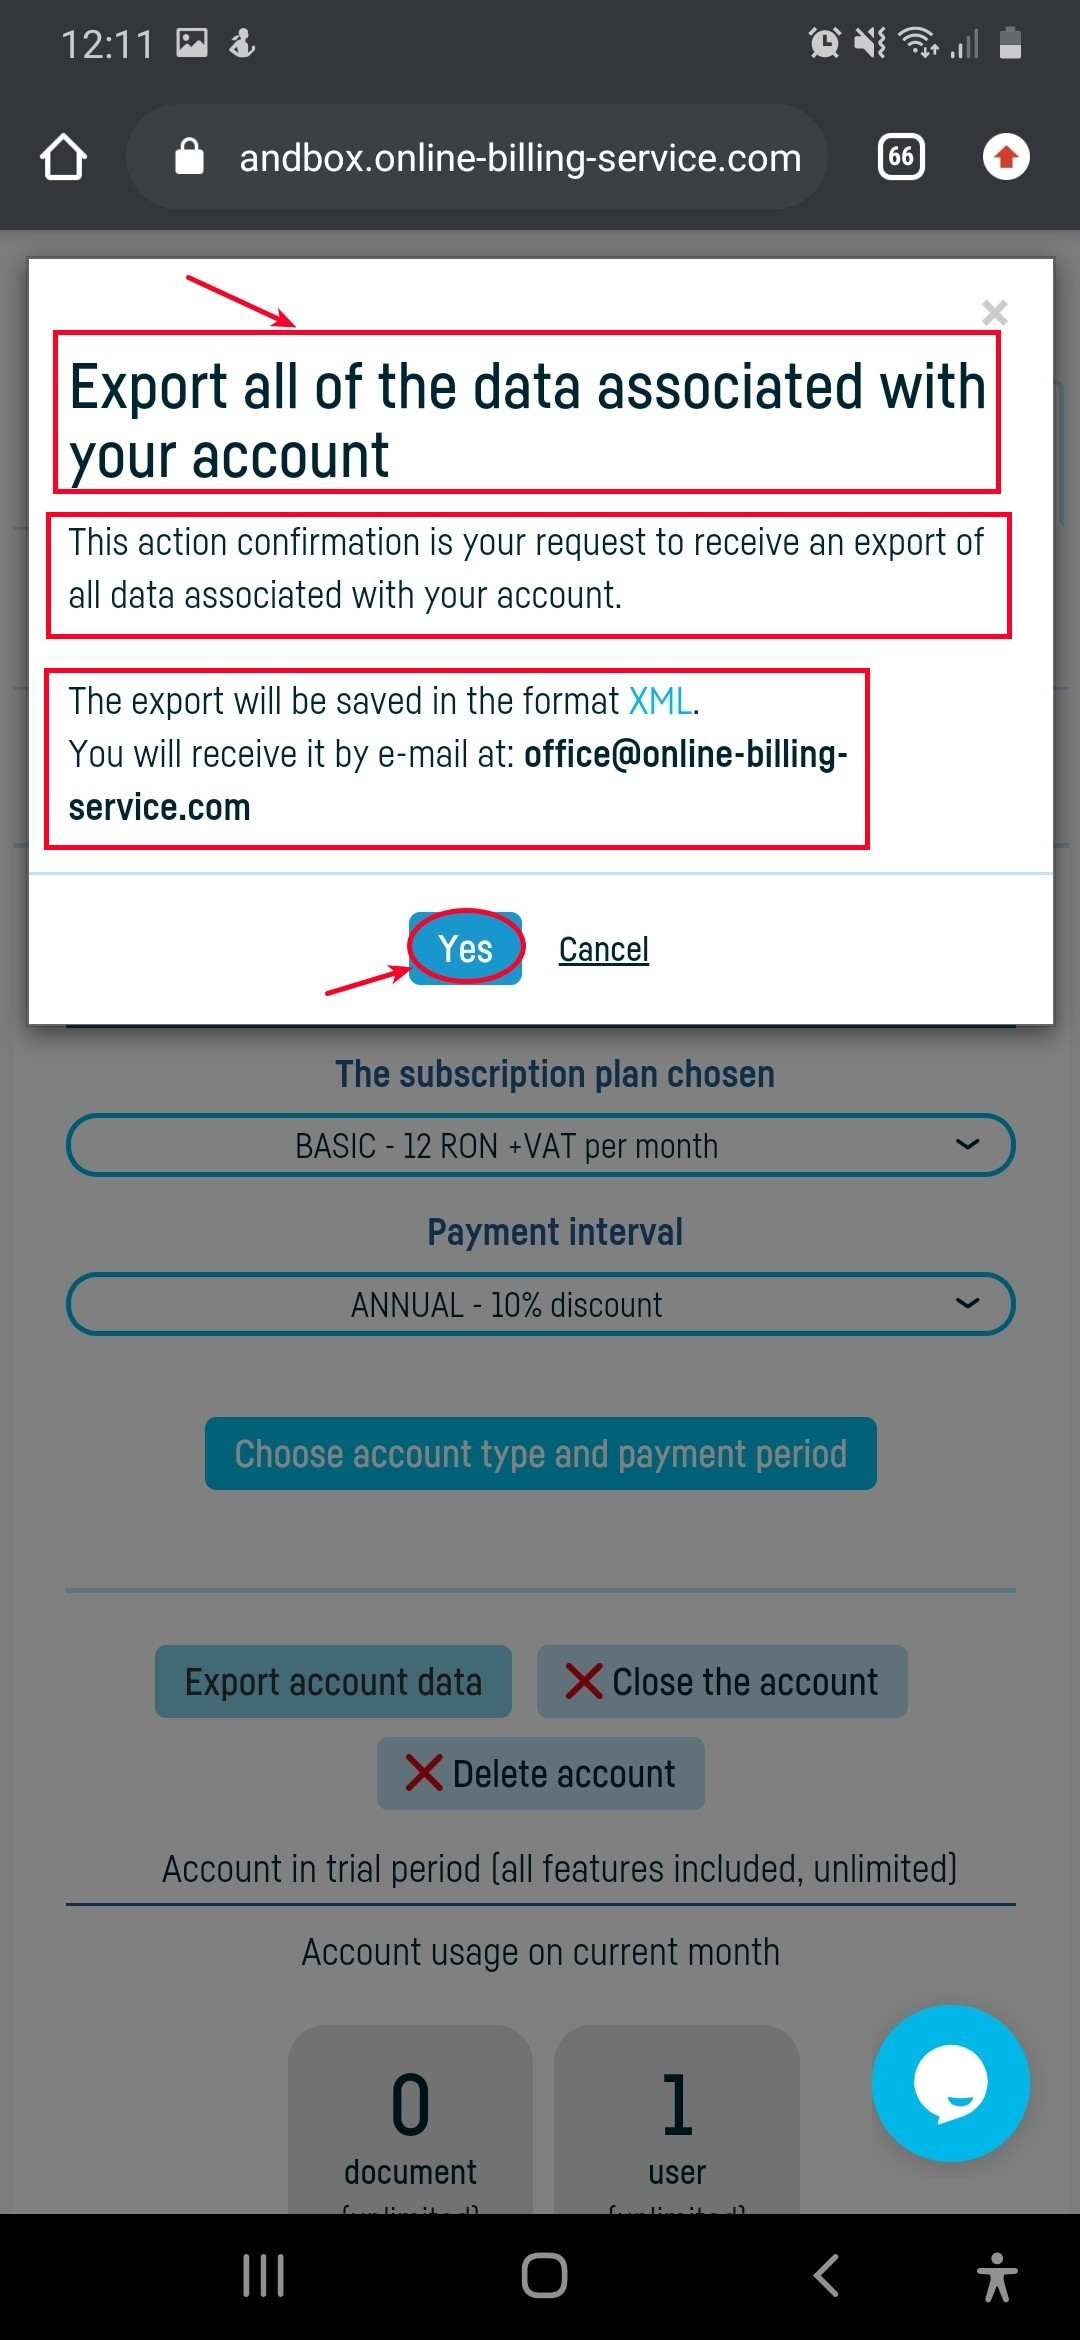 How do I export the data associated with my account? - step 5